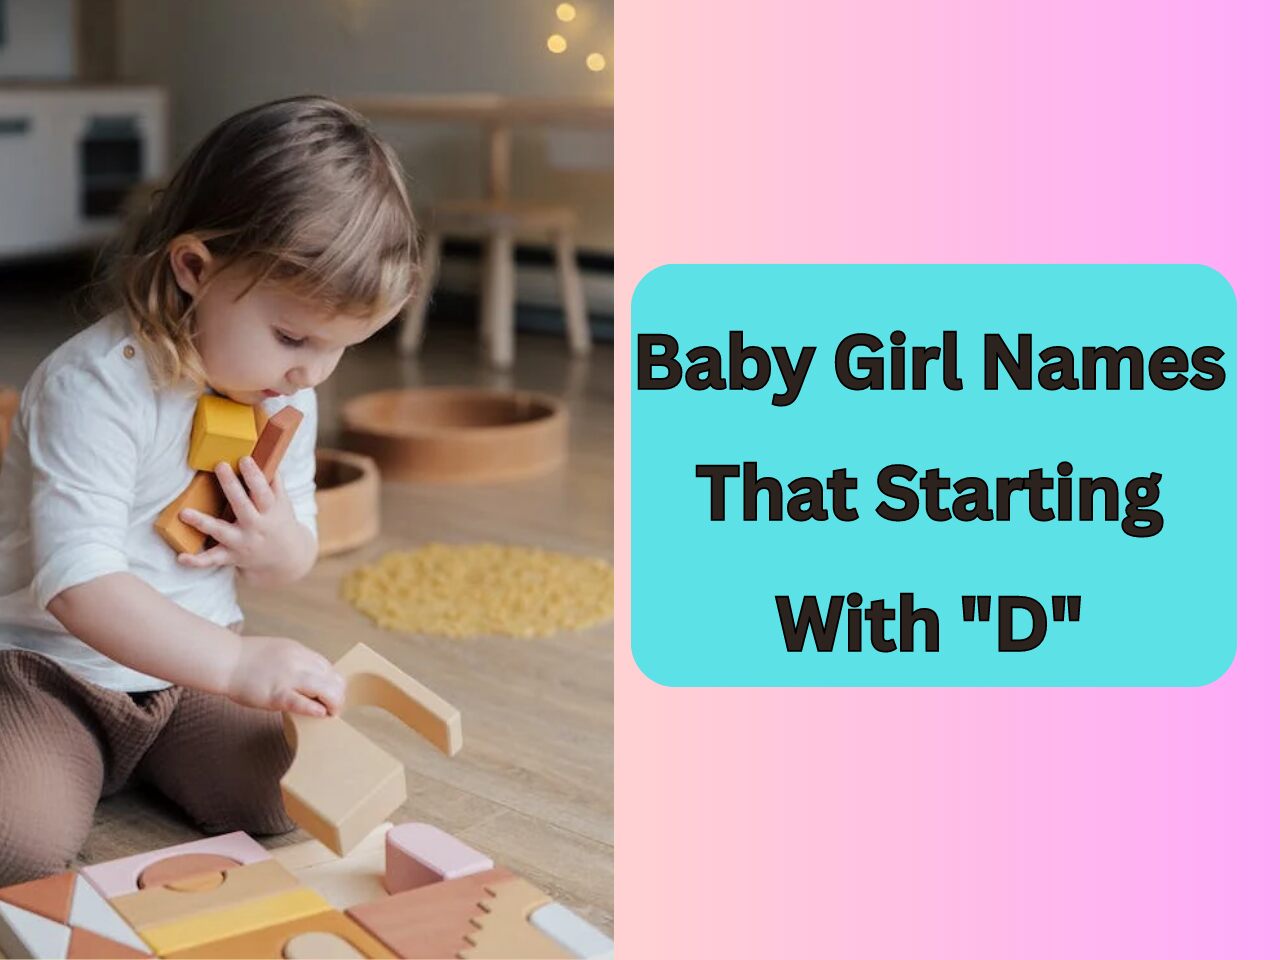 Baby Girl Names That Starting With D